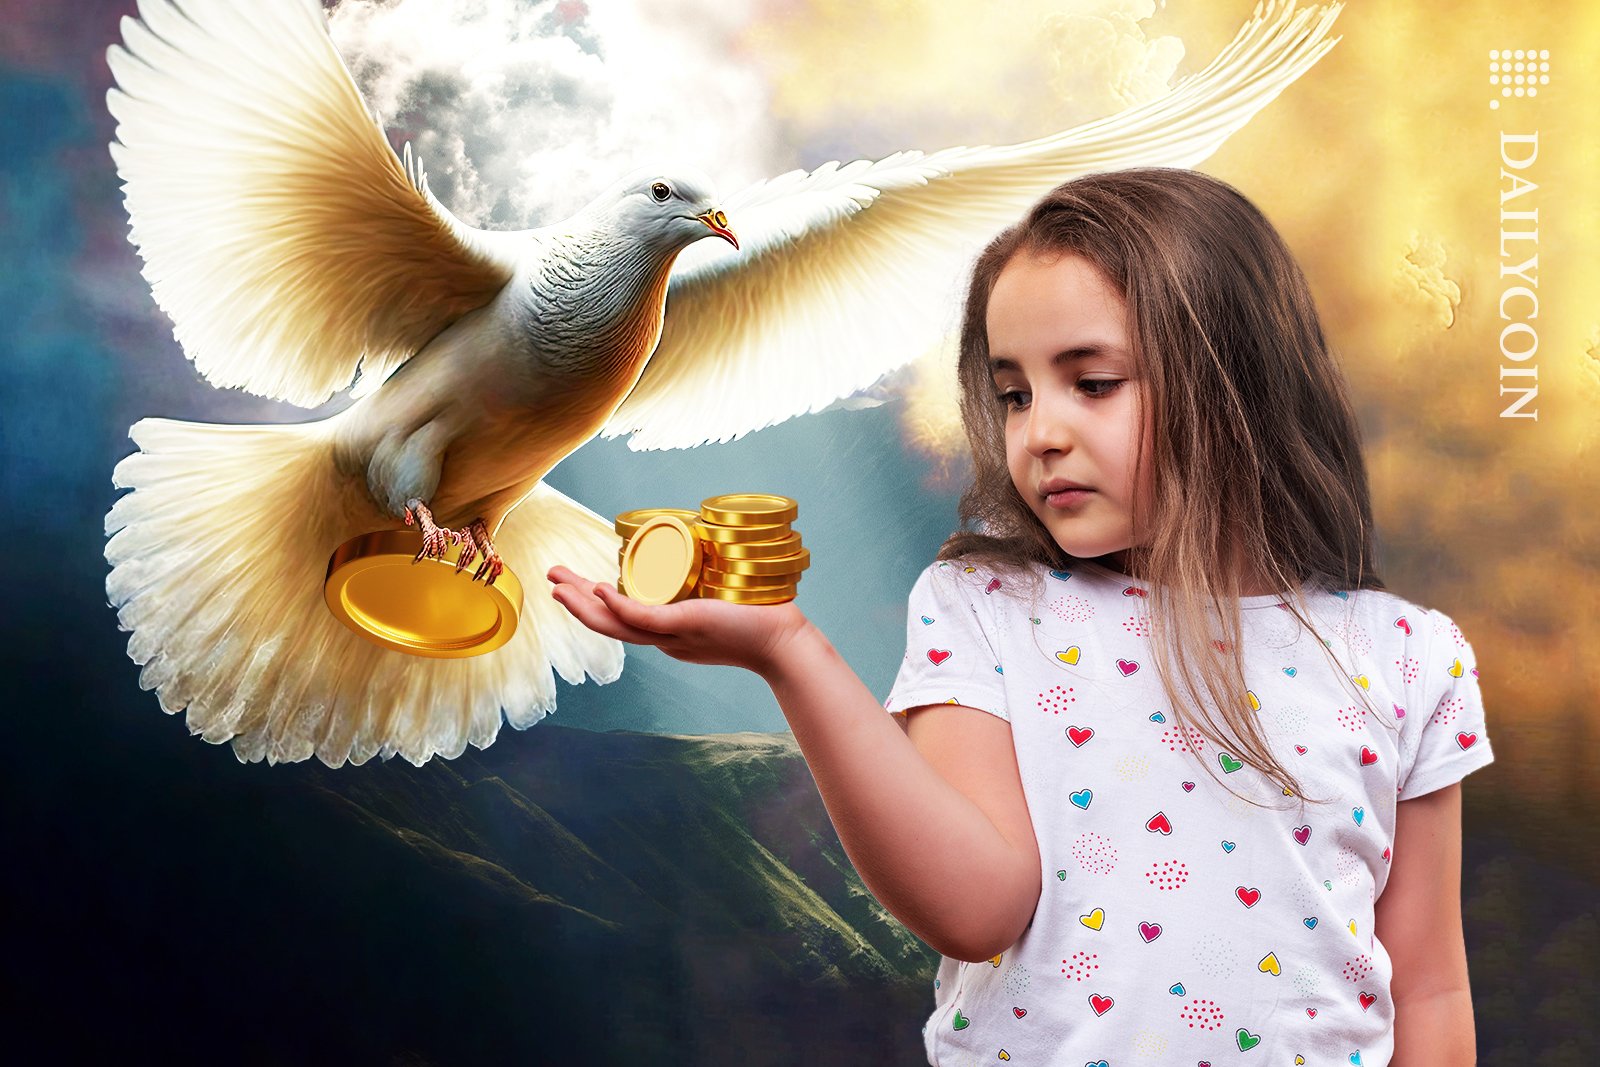 A dove delivering crypto coins to a young girl.